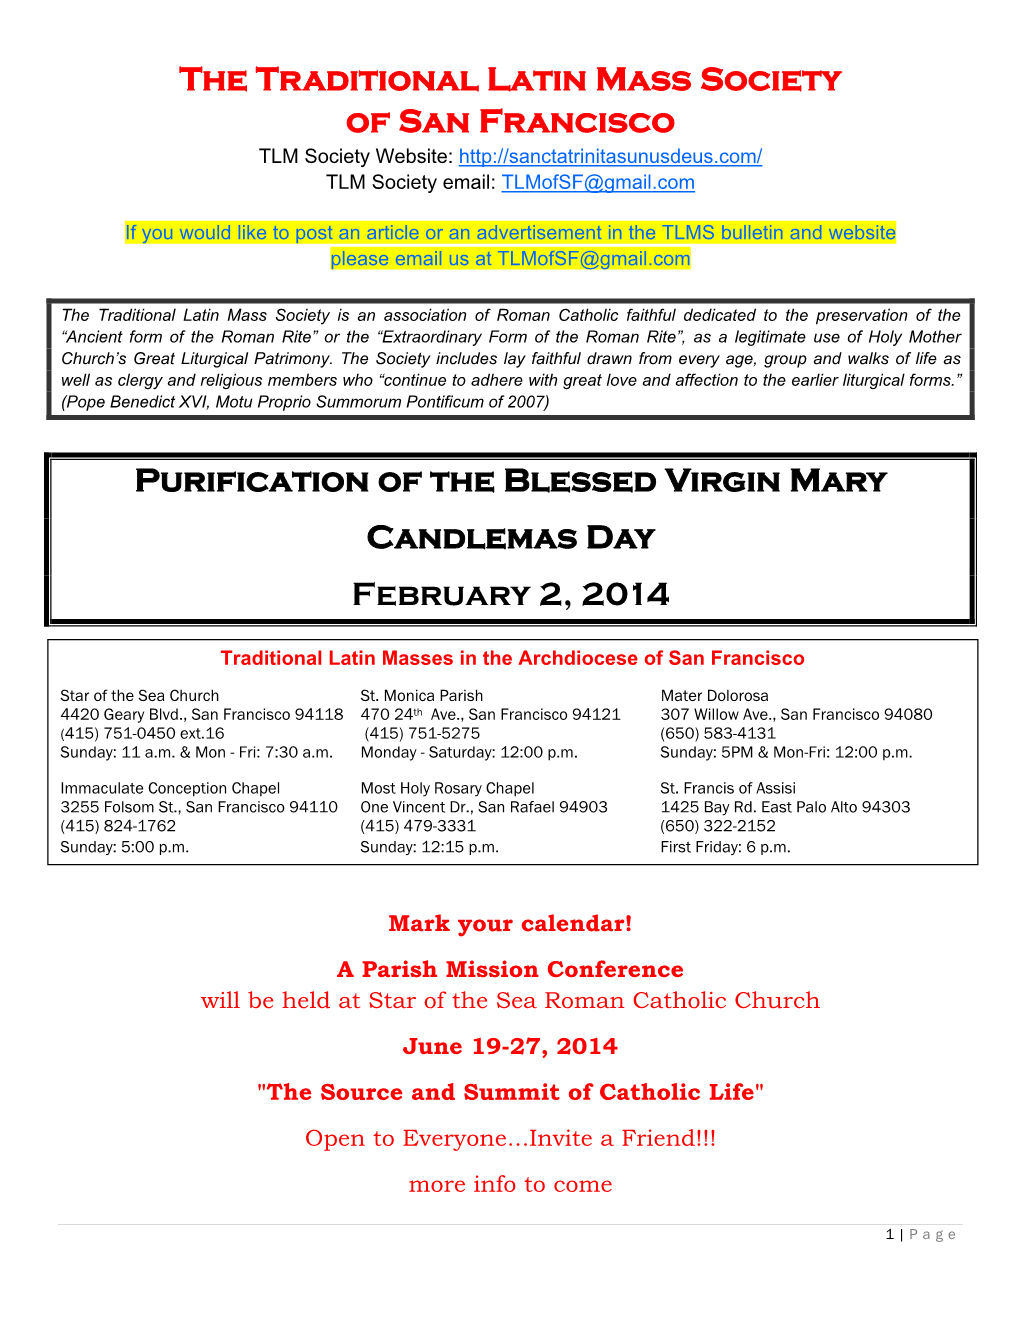 Purification of the Blessed Virgin Mary Candlemas Day February 2, 2014